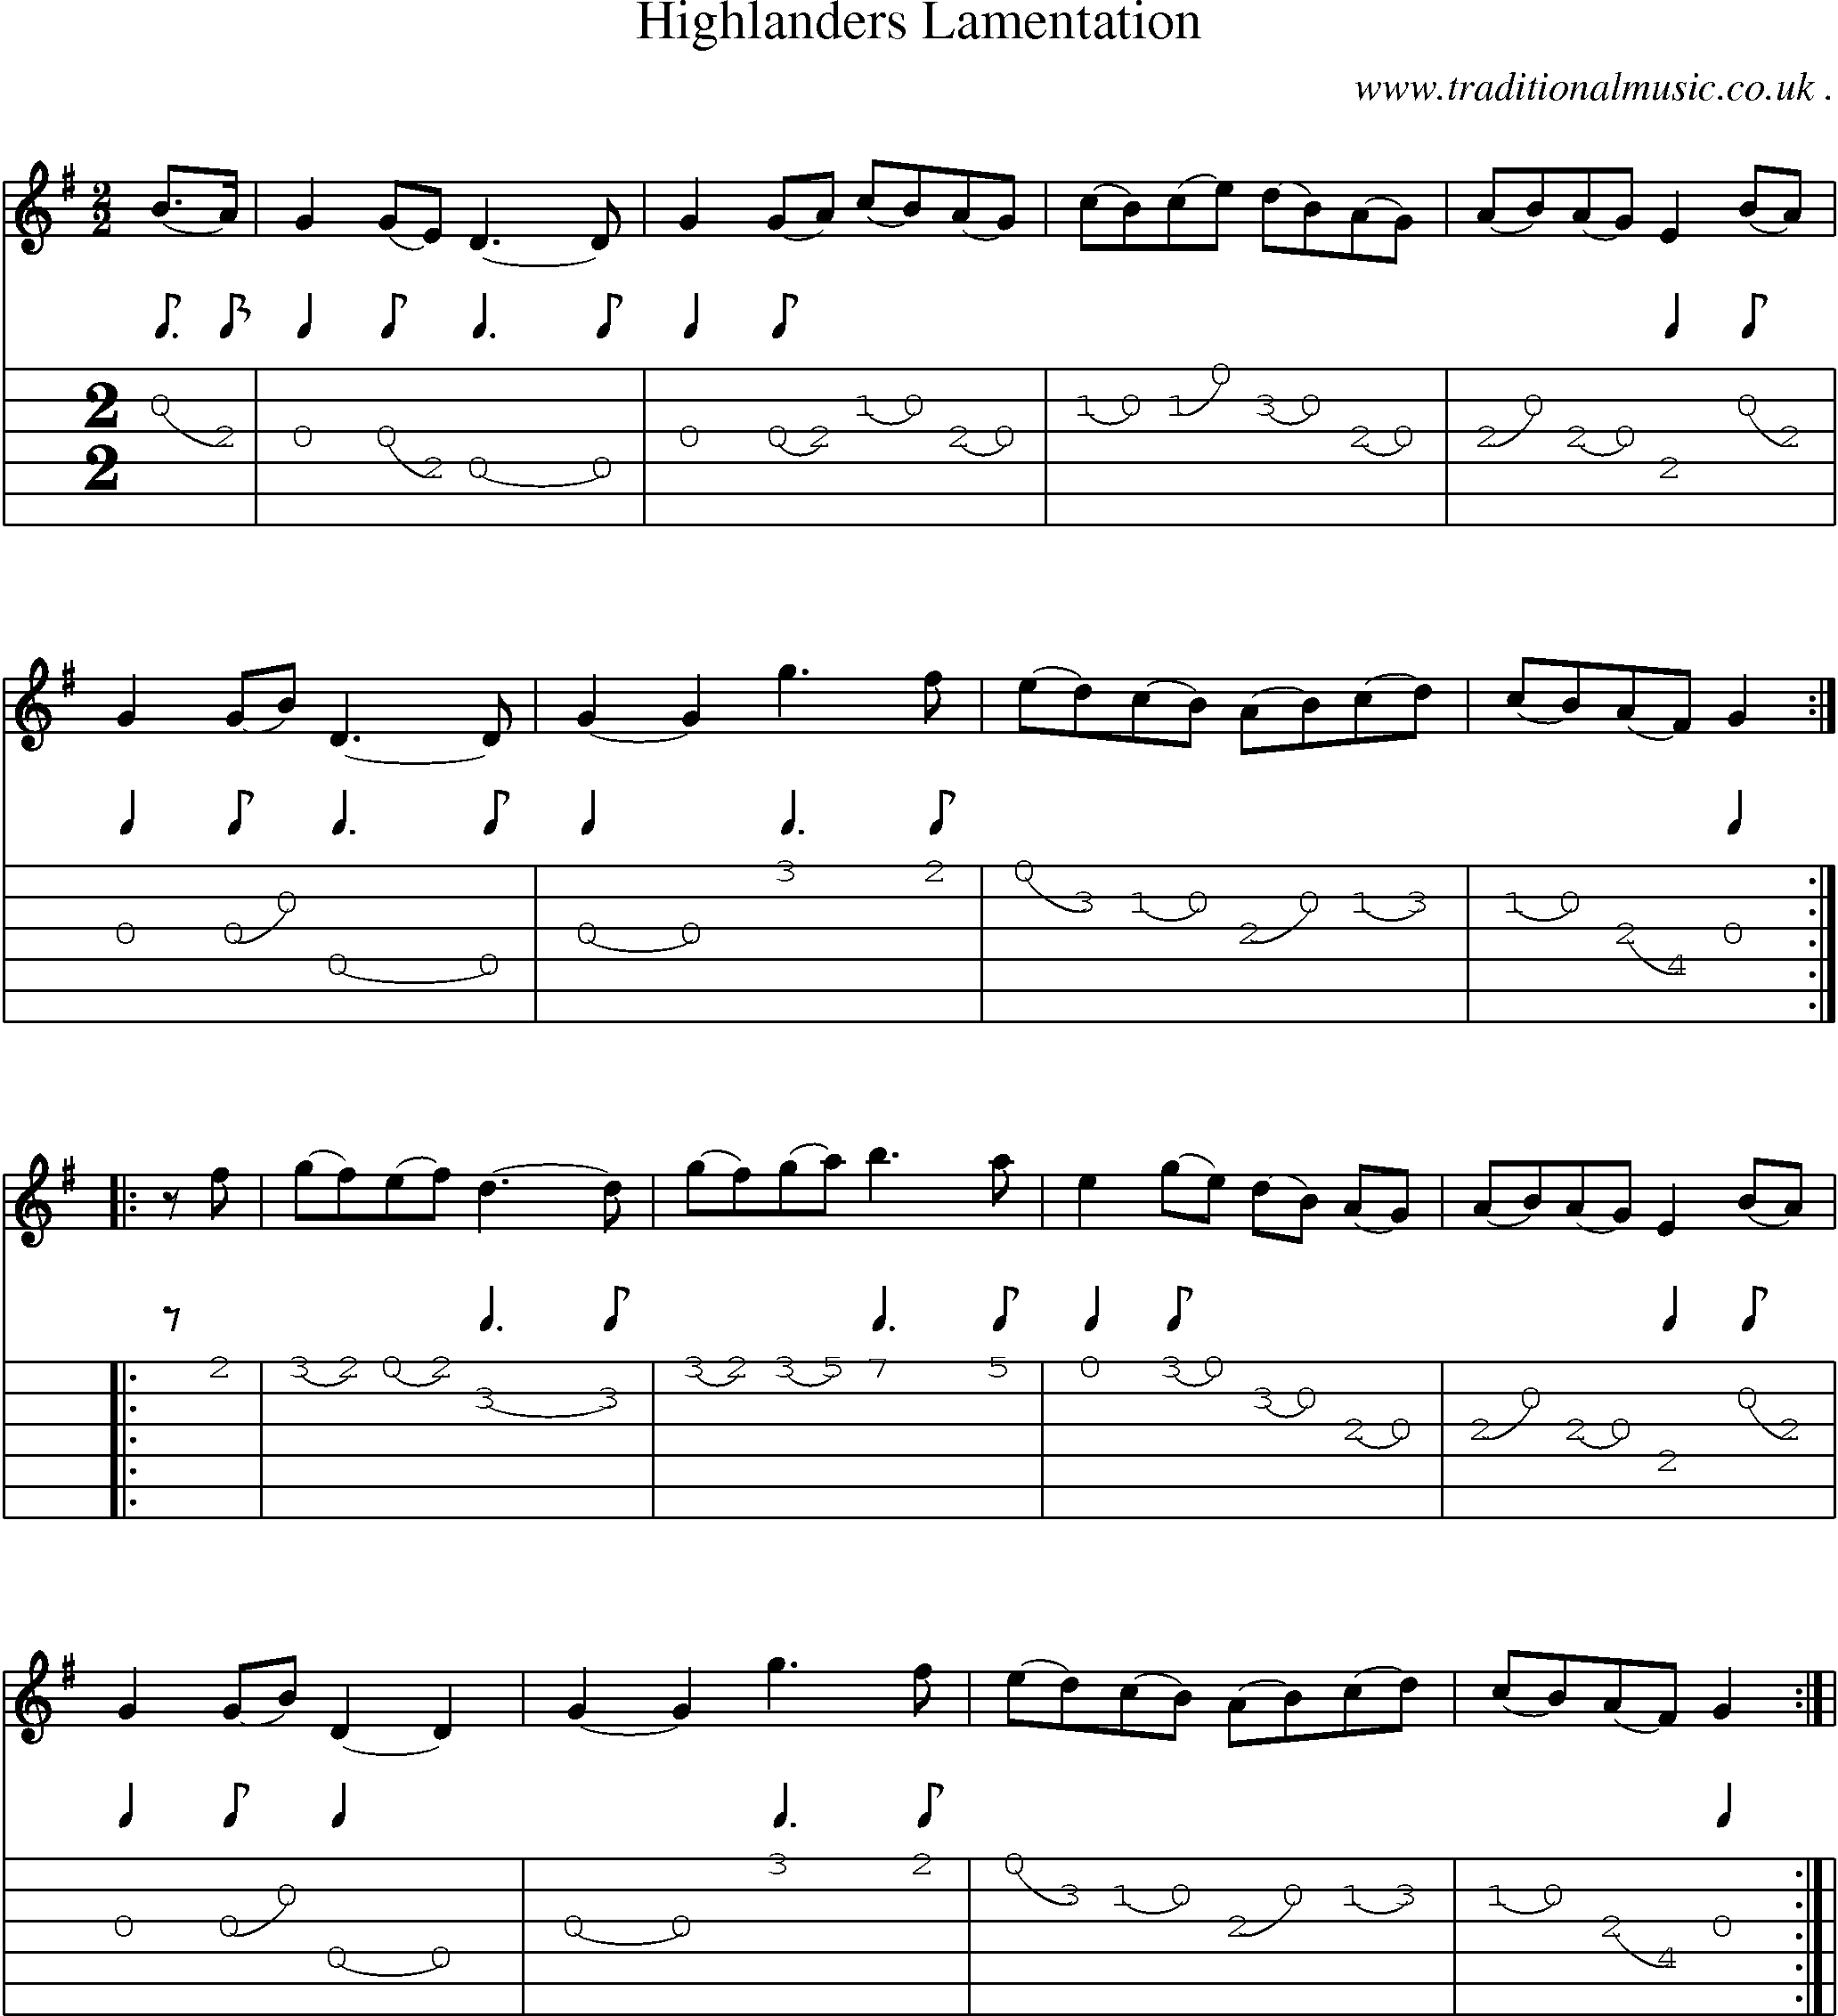 Sheet-Music and Guitar Tabs for Highlanders Lamentation